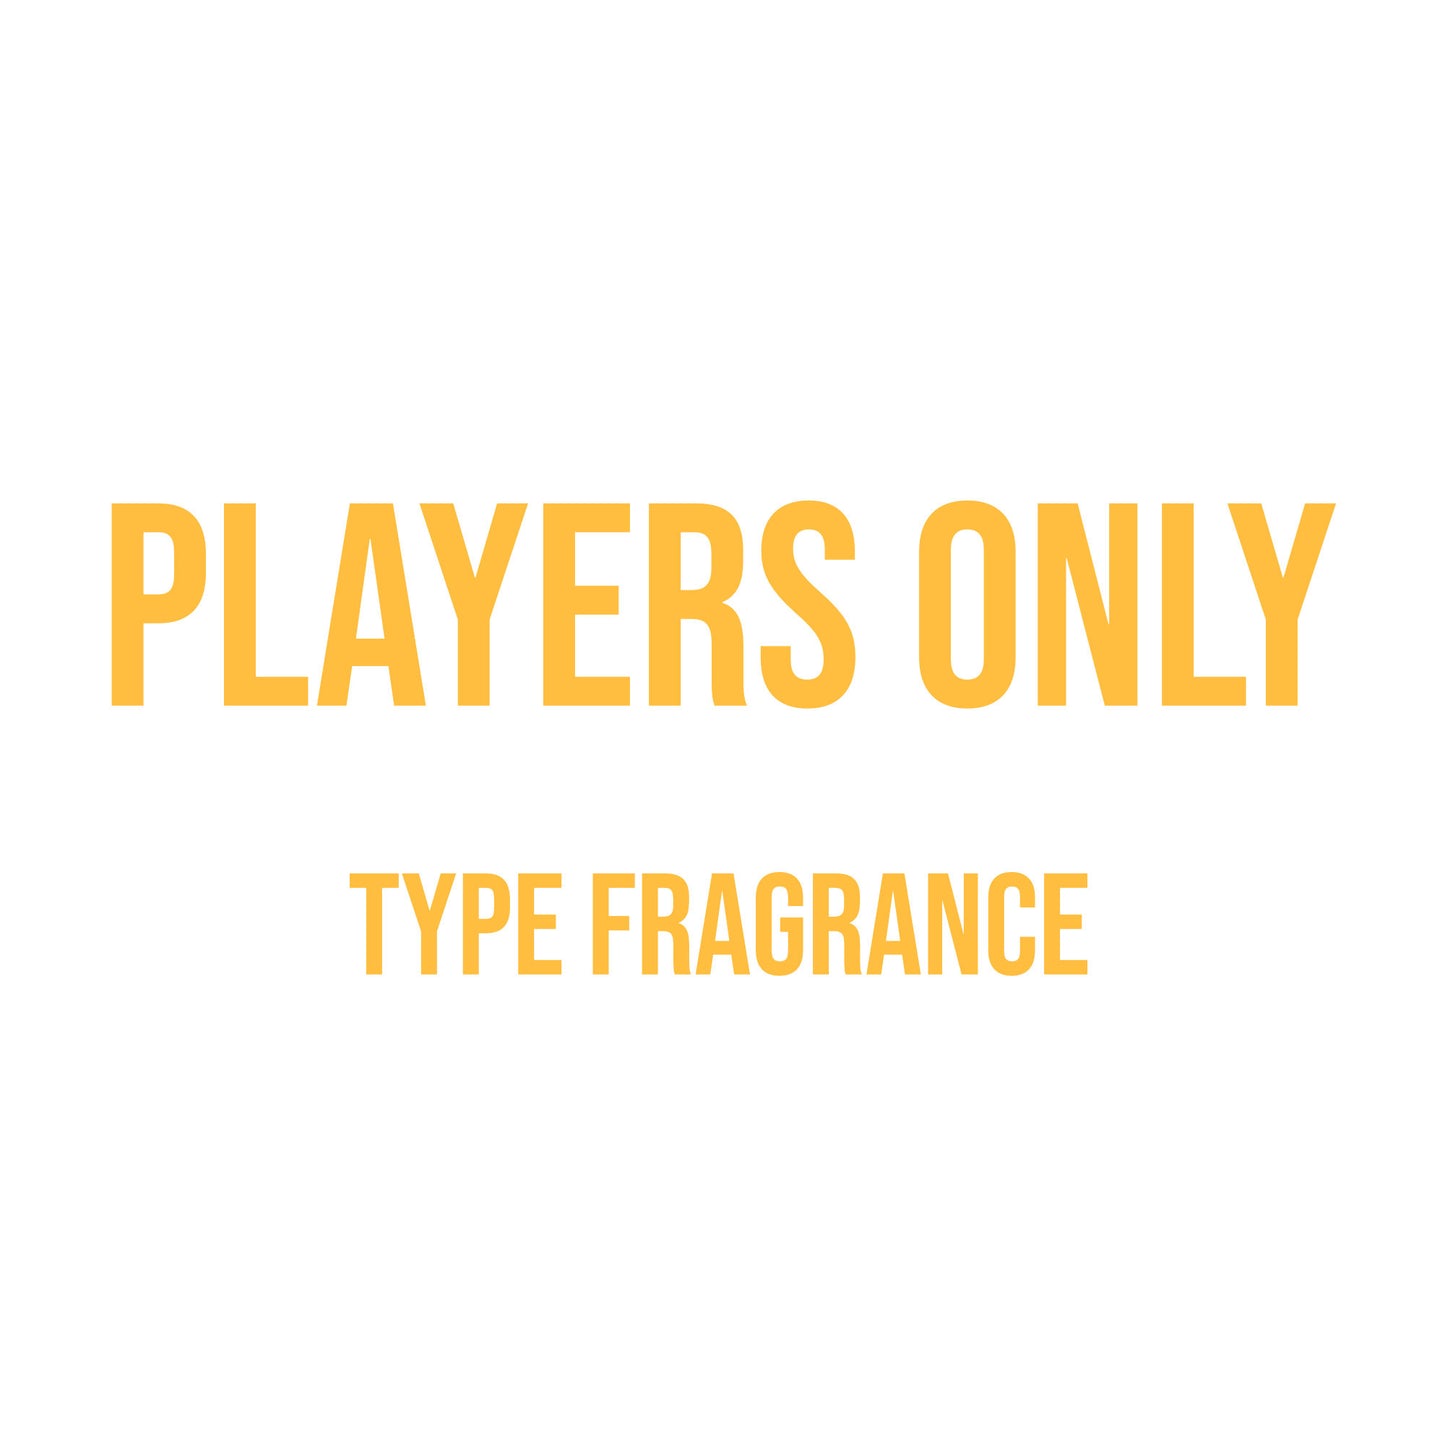 Players Only Type Fragrance